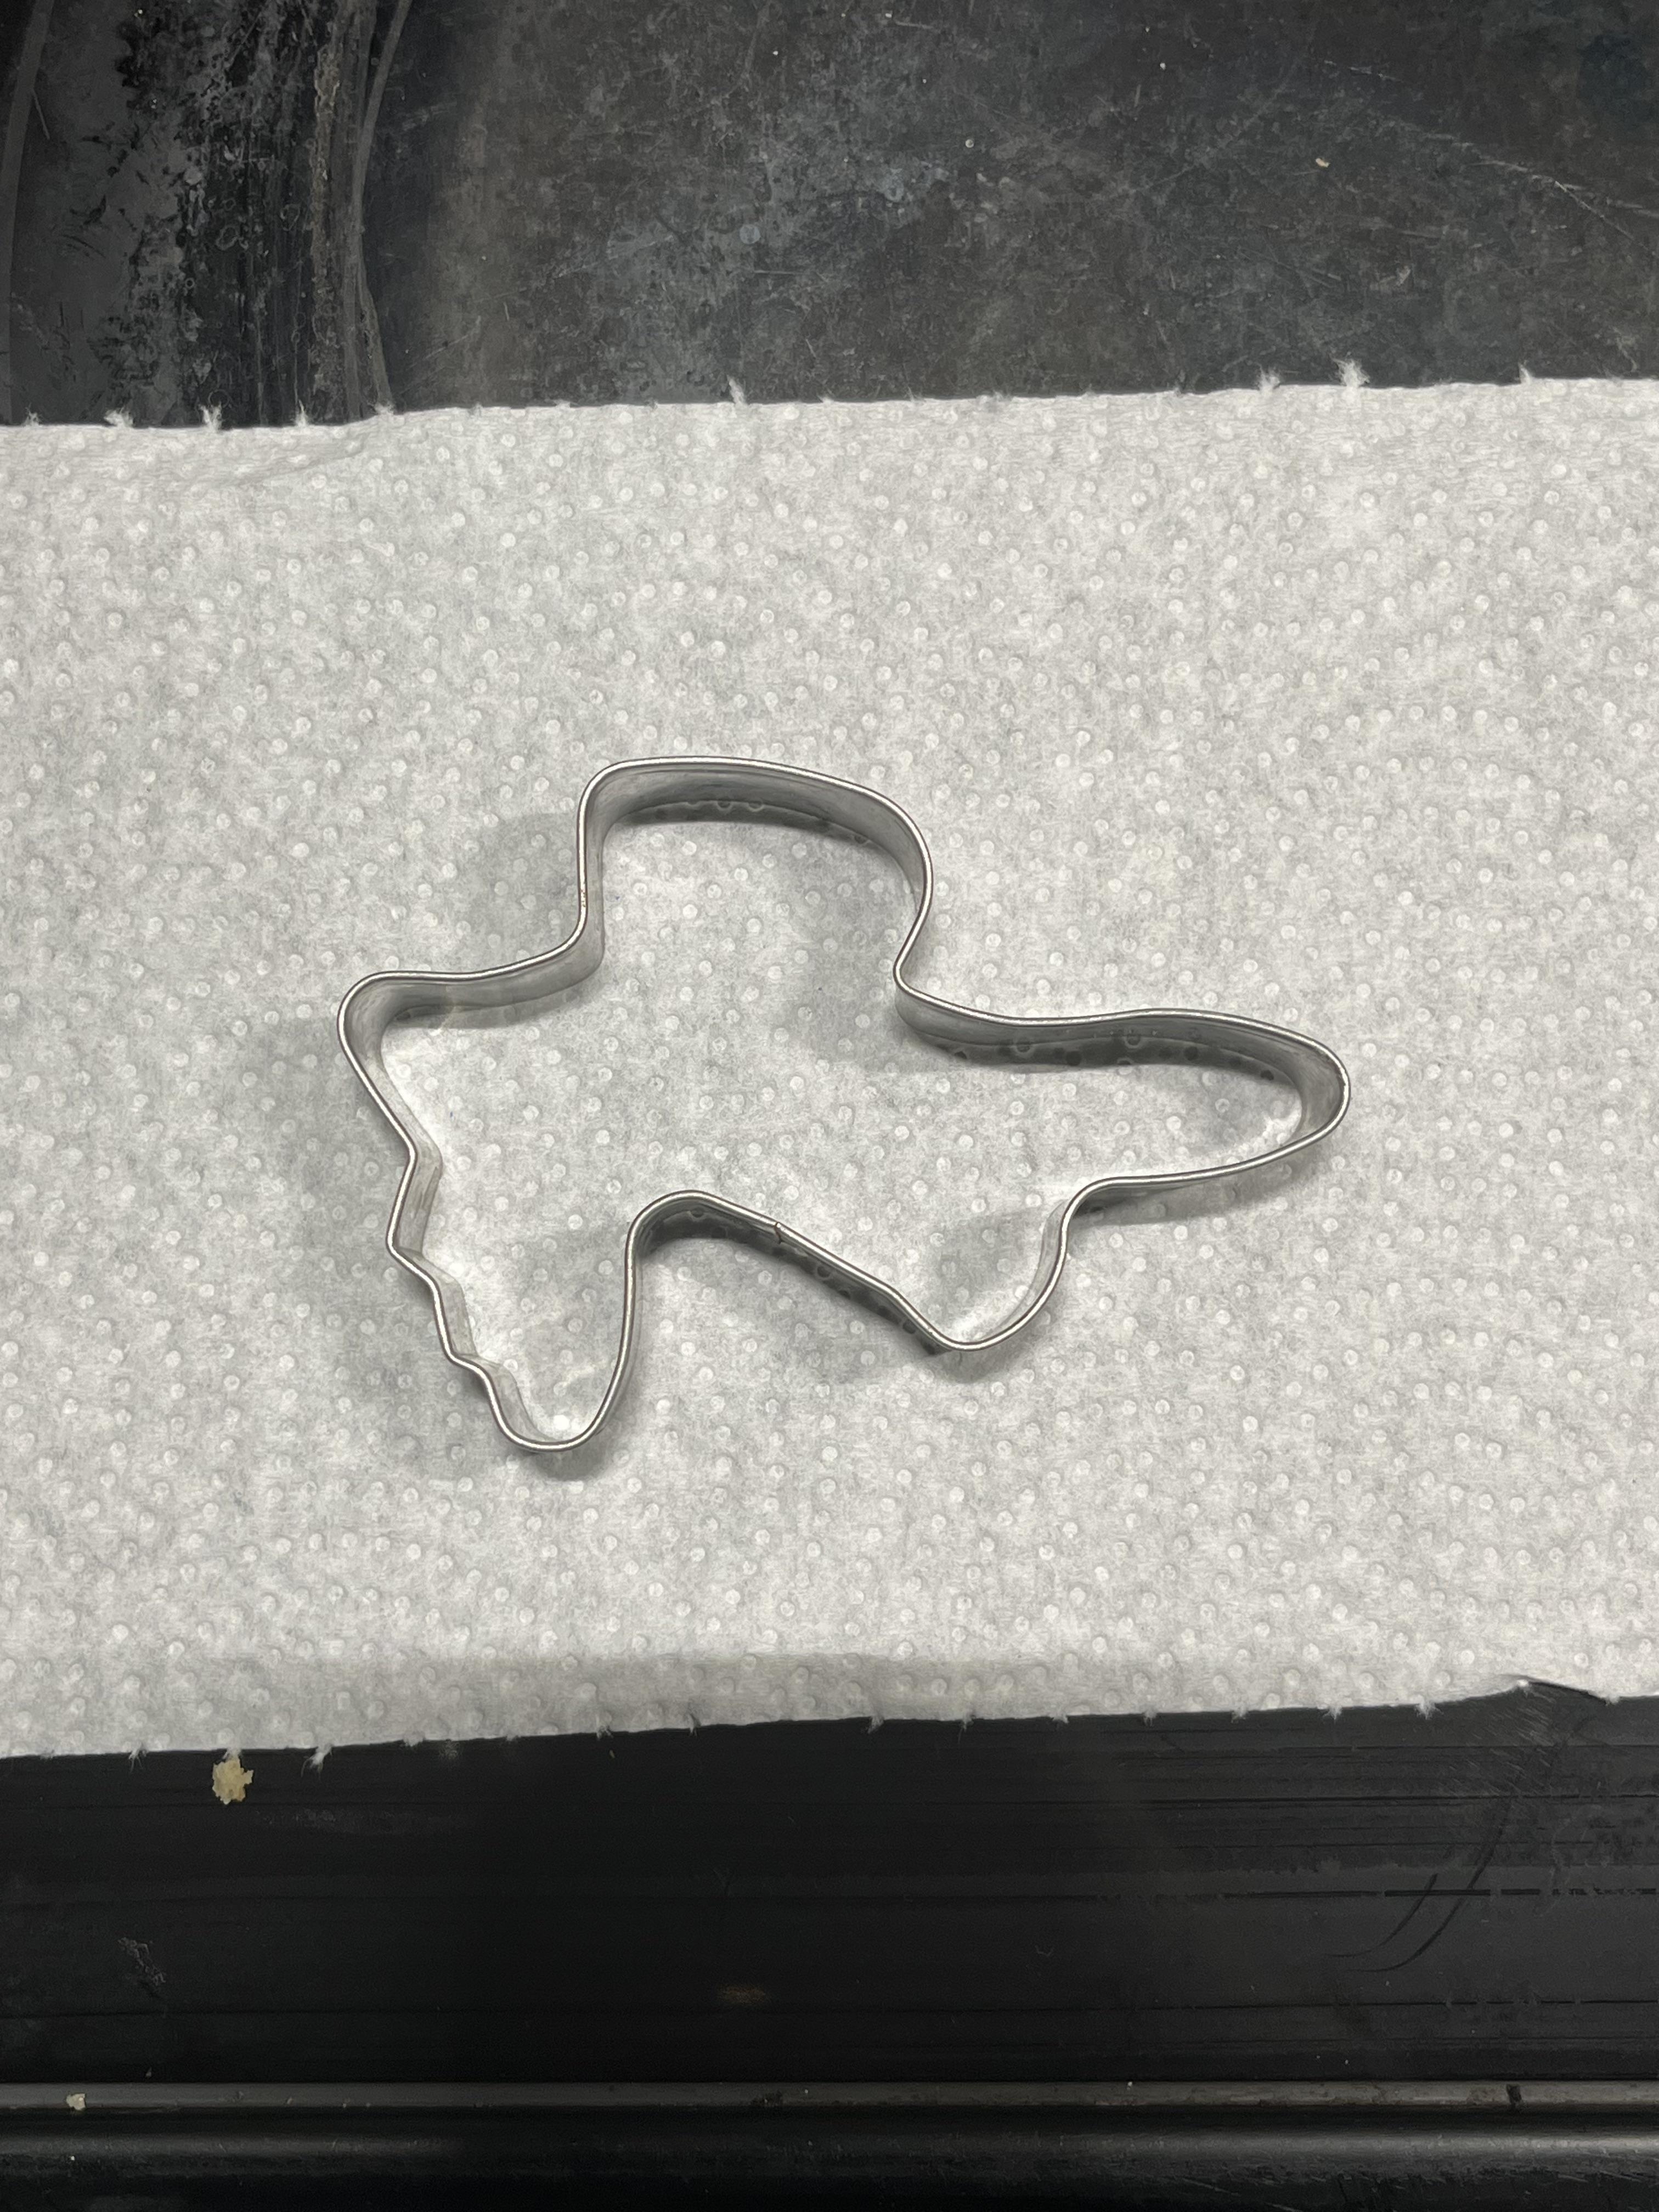 A cookie cutter that&#x27;s difficult to identify, with a lump in the middle and two misshapen lumps at the bottom